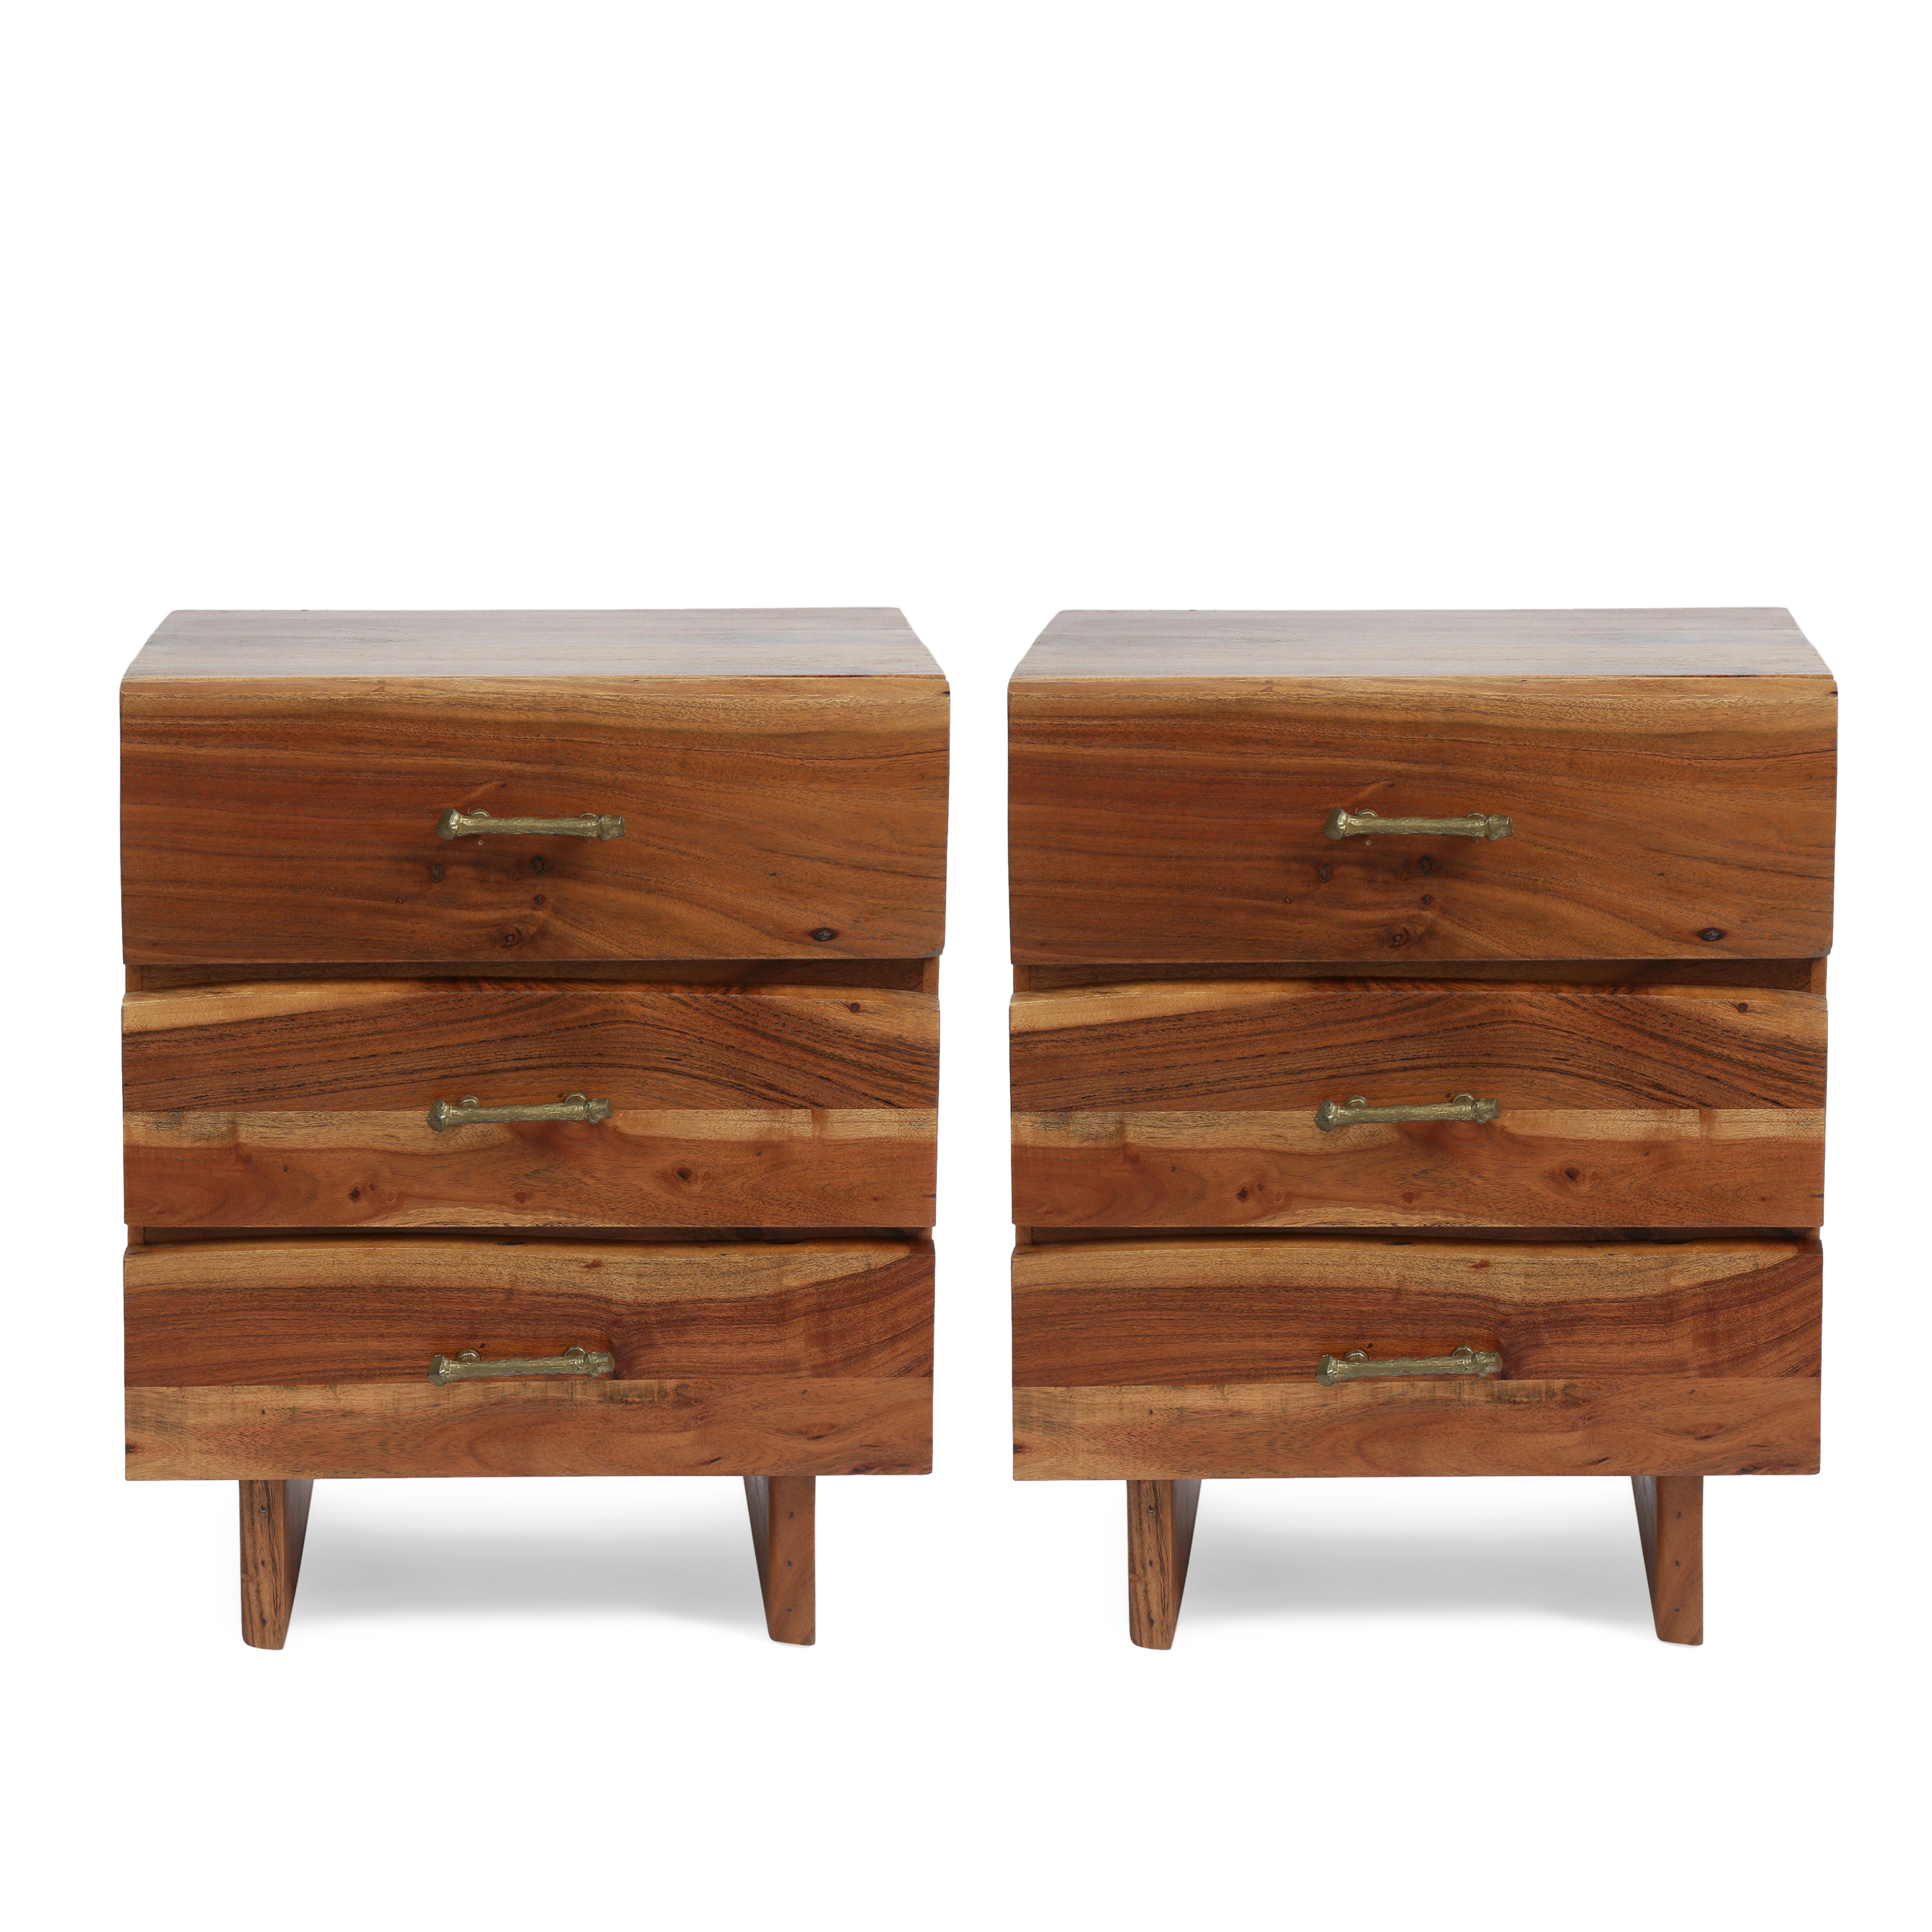 Tift Terrell Handcrafted Boho Acacia Wood 3 Drawer Nightstand (Set of 2), Dark Natural - image 1 of 7